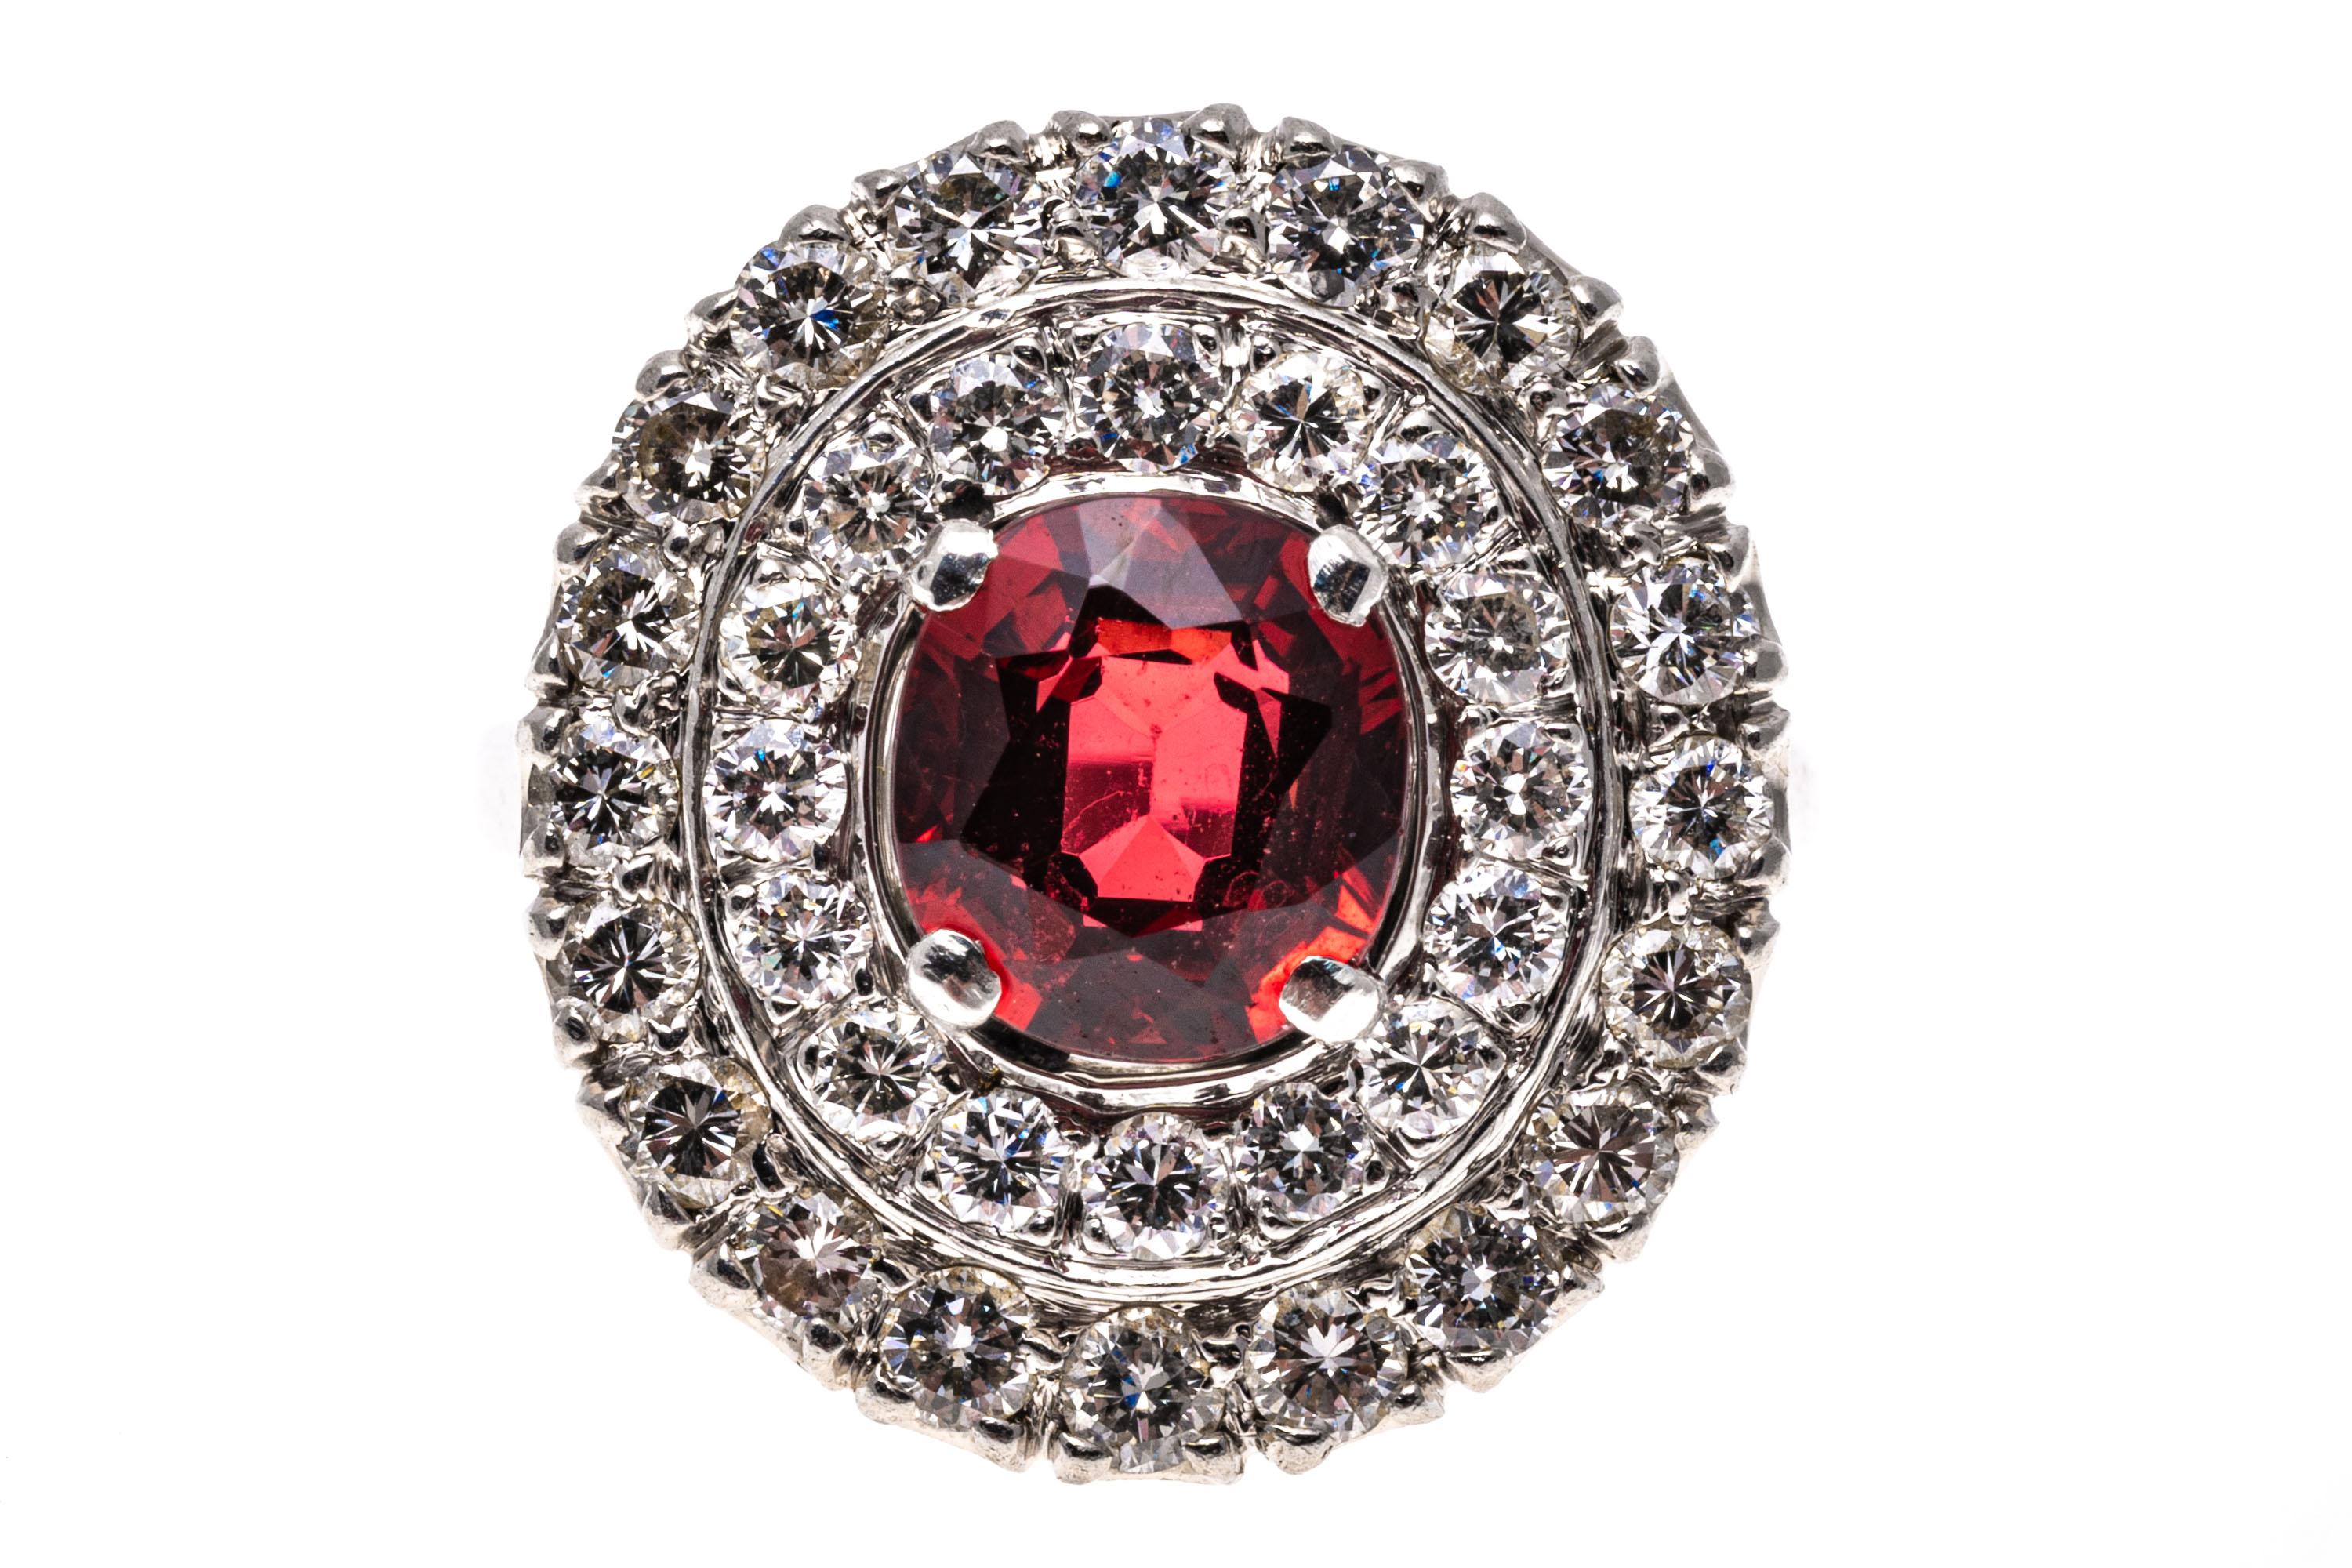 Platinum, Zircon And Diamond Double Halo Cocktail Ring, App. 0.92 TCW.
This gorgeous ring is a cocktail style, with a faceted oval shape, medium to dark red orange zircon center stone, prong set, and approximately 2.37 CTS. Surrounding the stone is